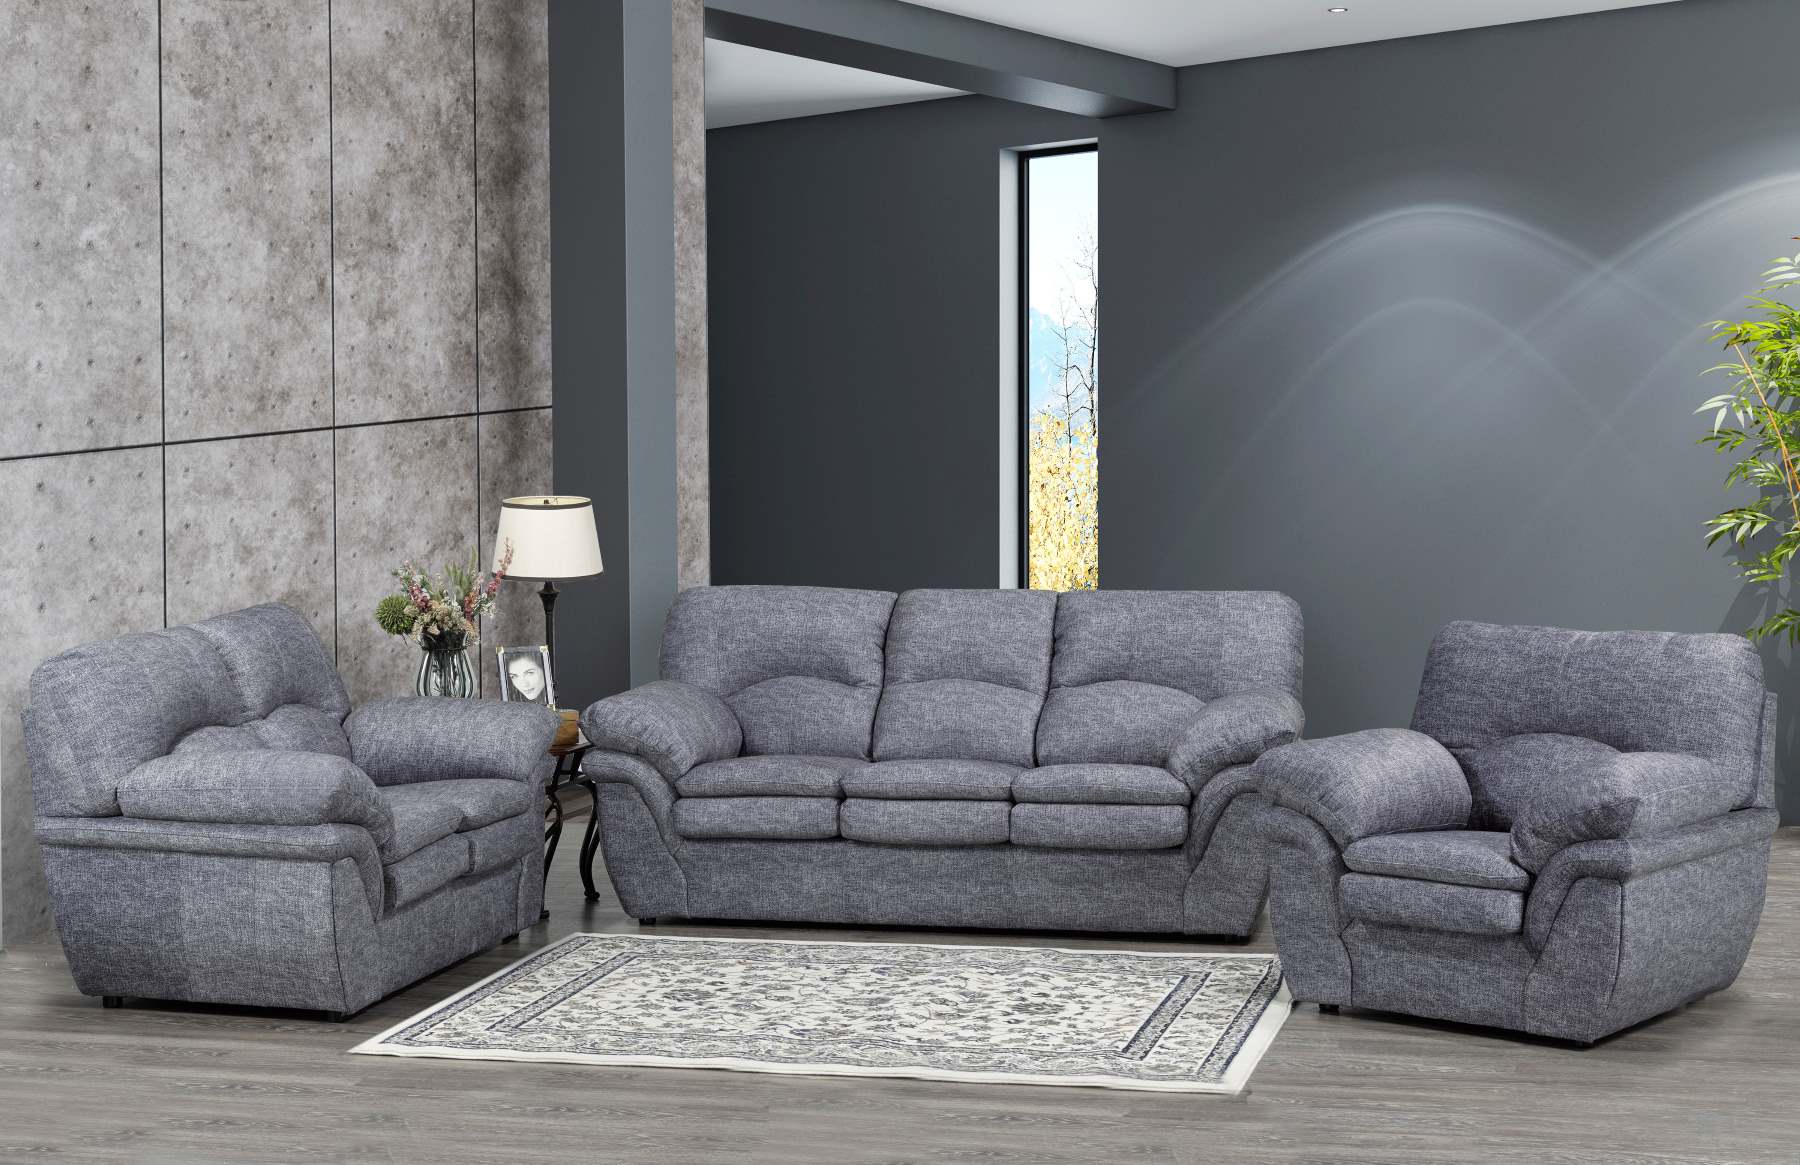 Canadian Made Lovey's Pewter Sofa Collection 6050